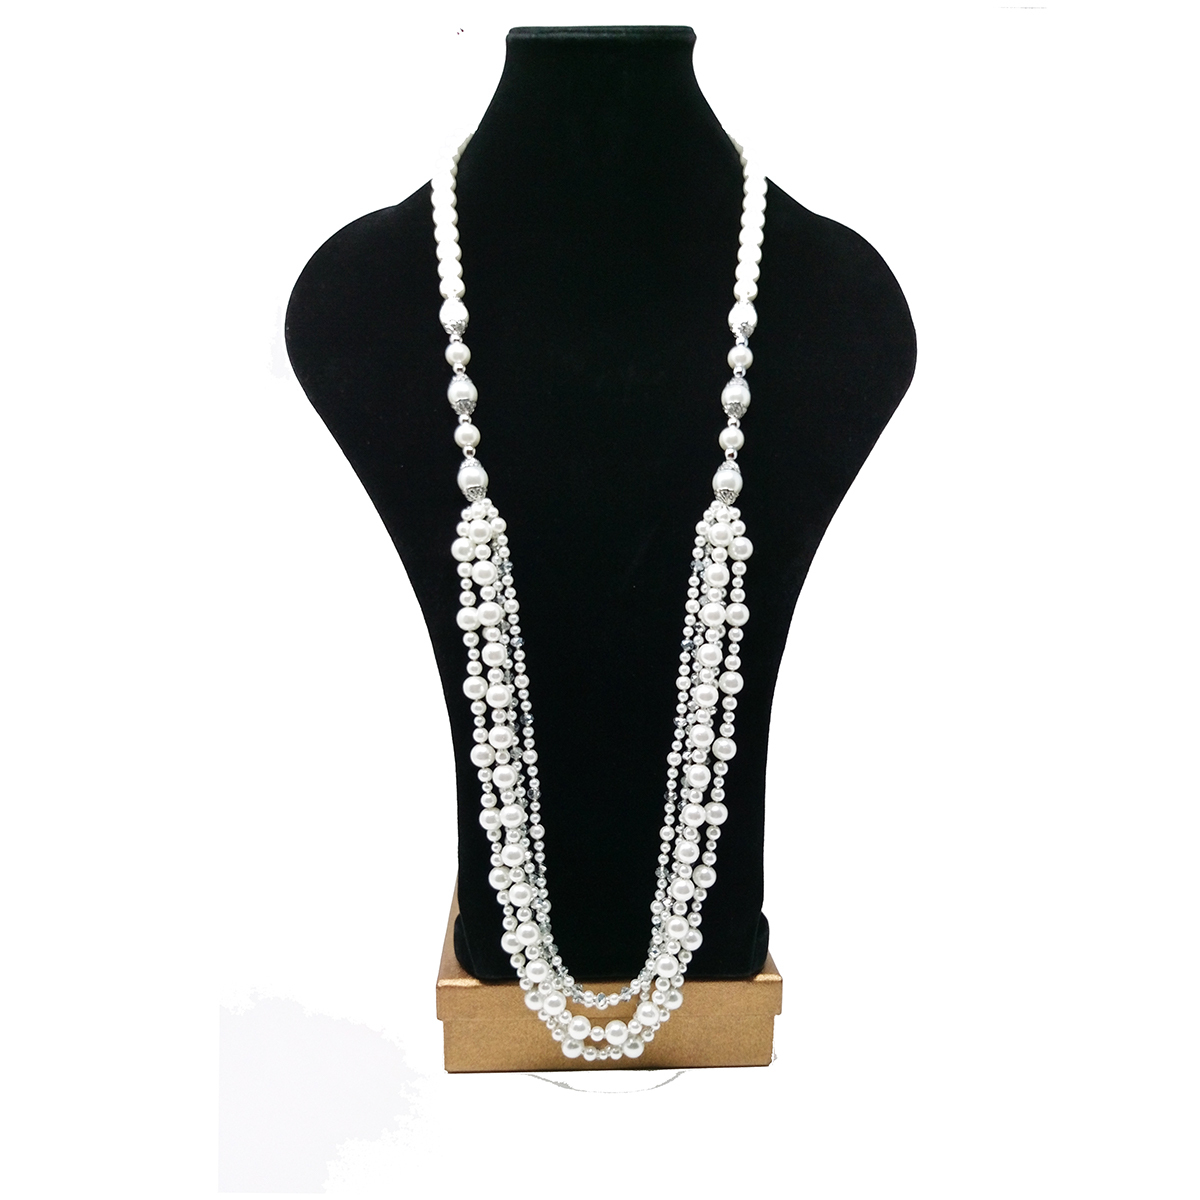 Off-White Pearl Sway Necklace - HMJServices